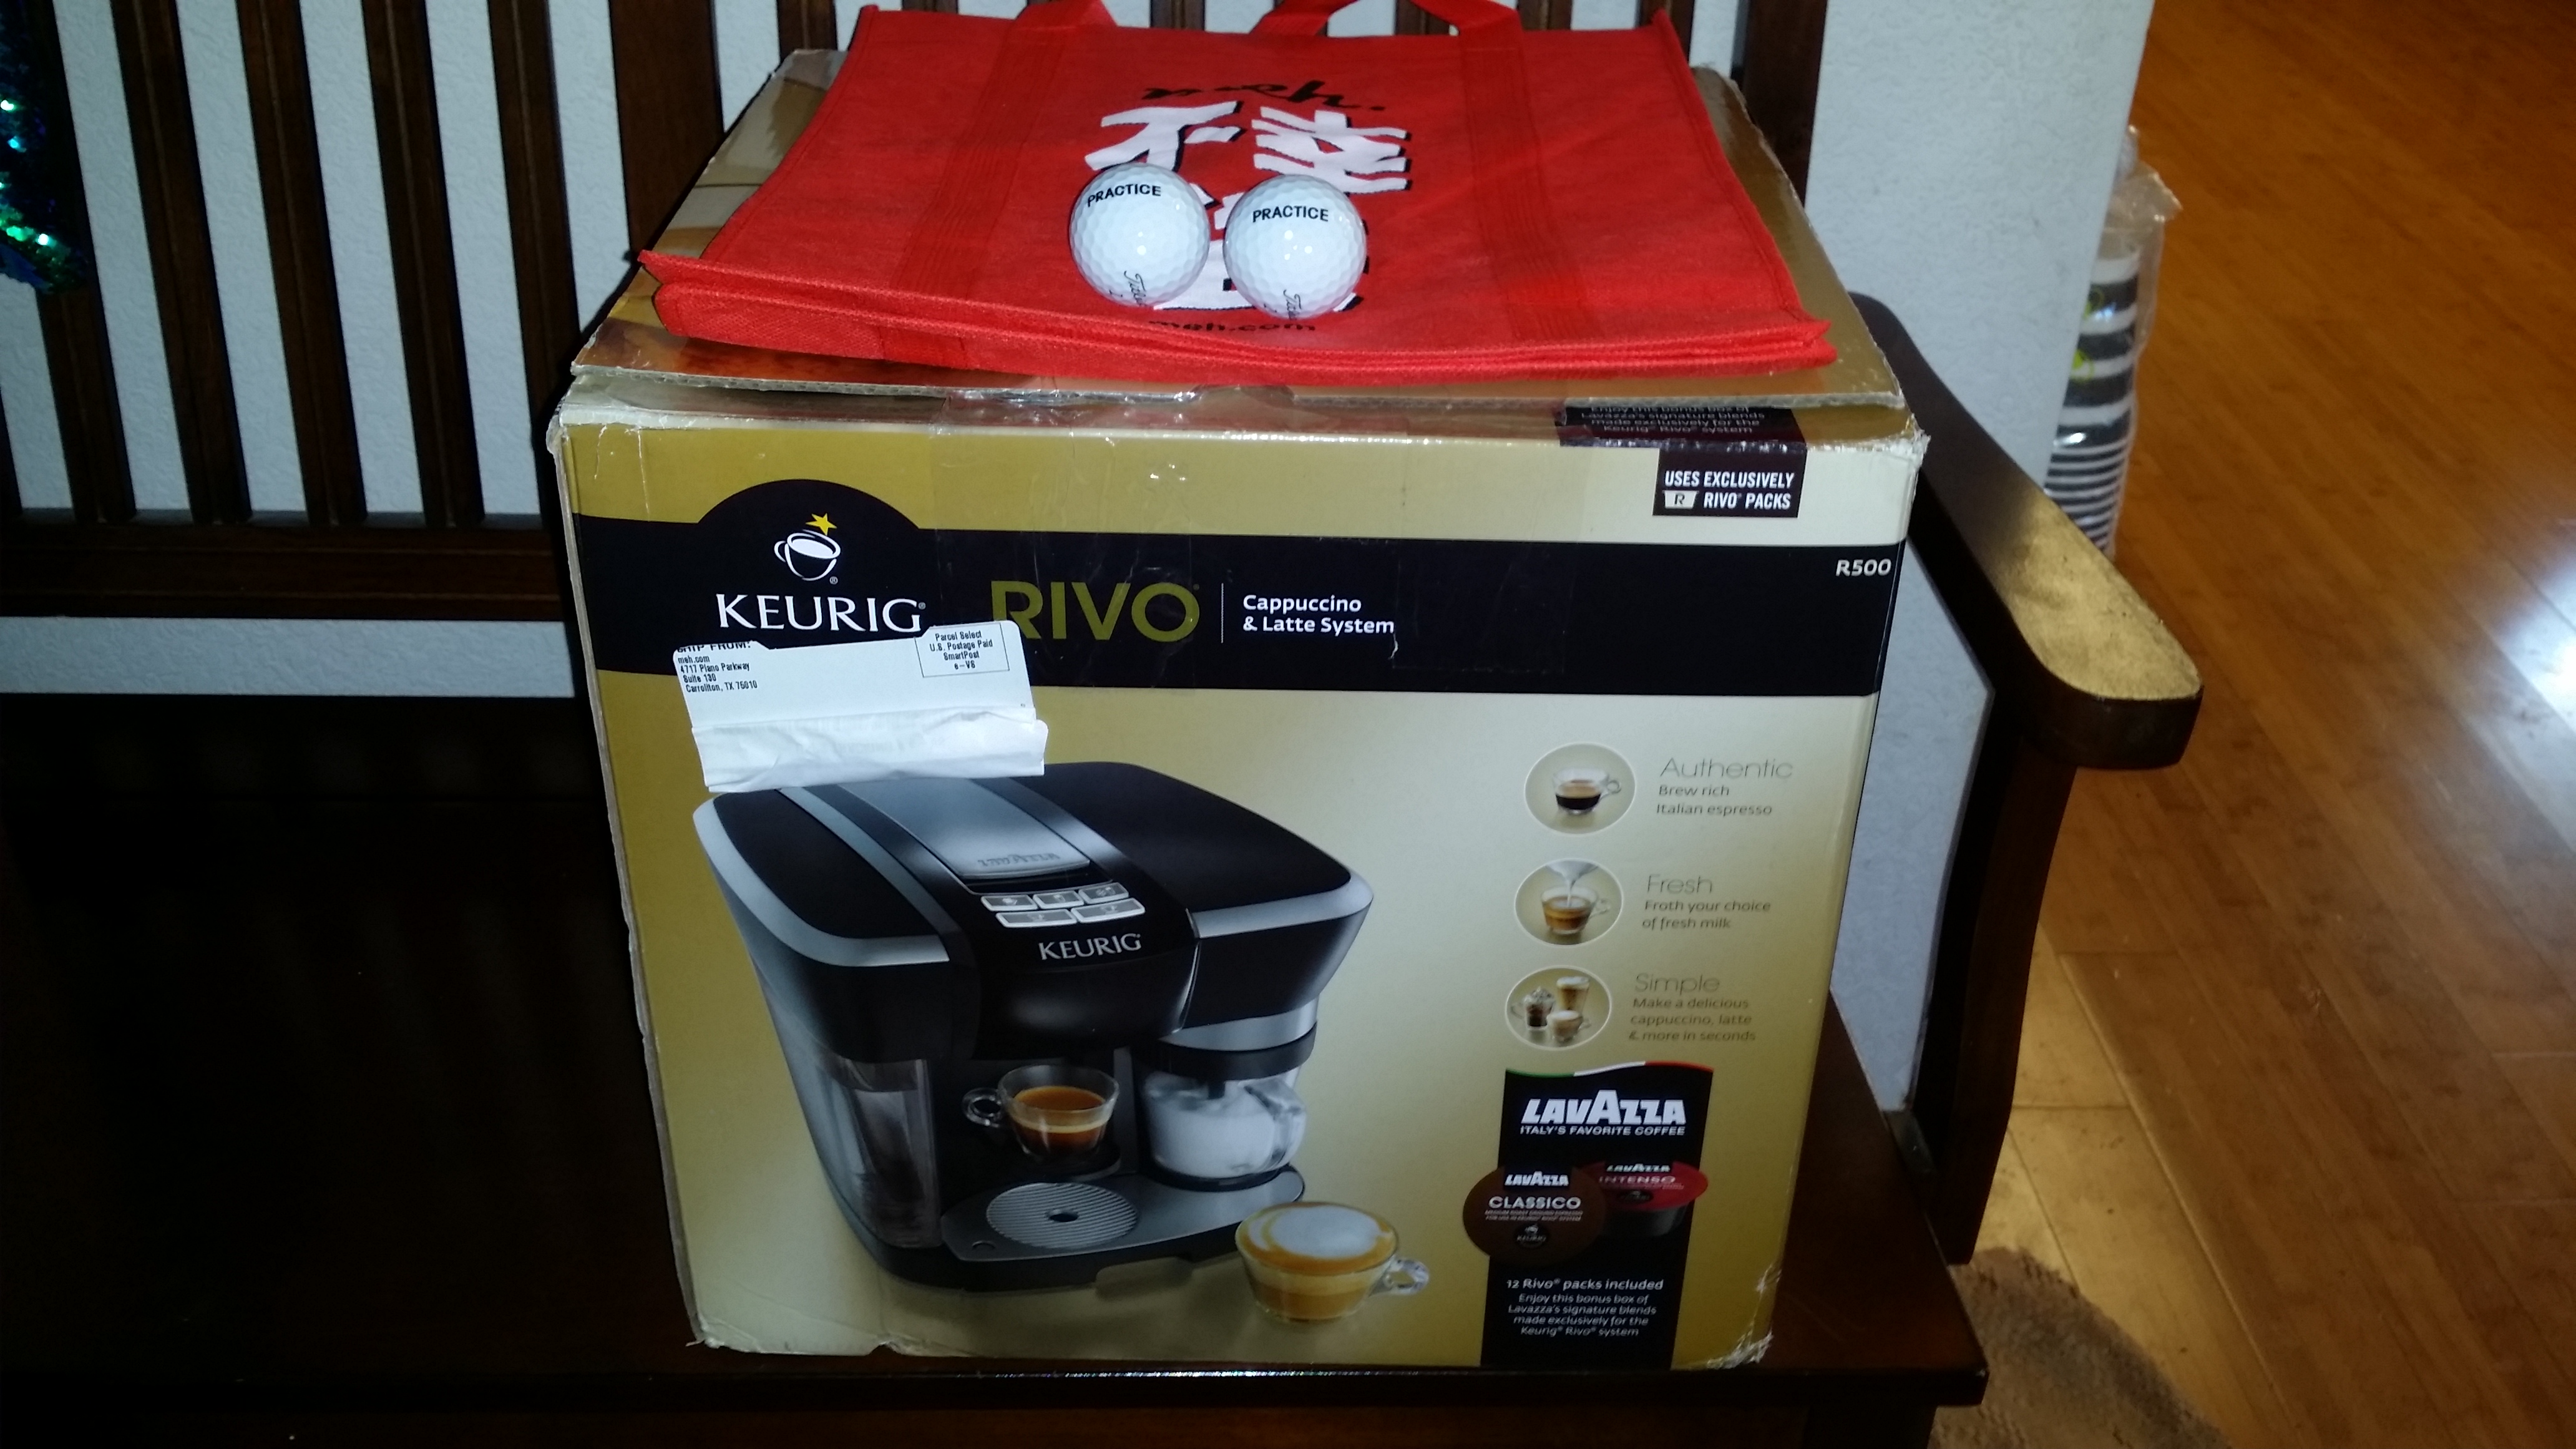 Instant Pot - 10 Quart for Sale in Plano, TX - OfferUp